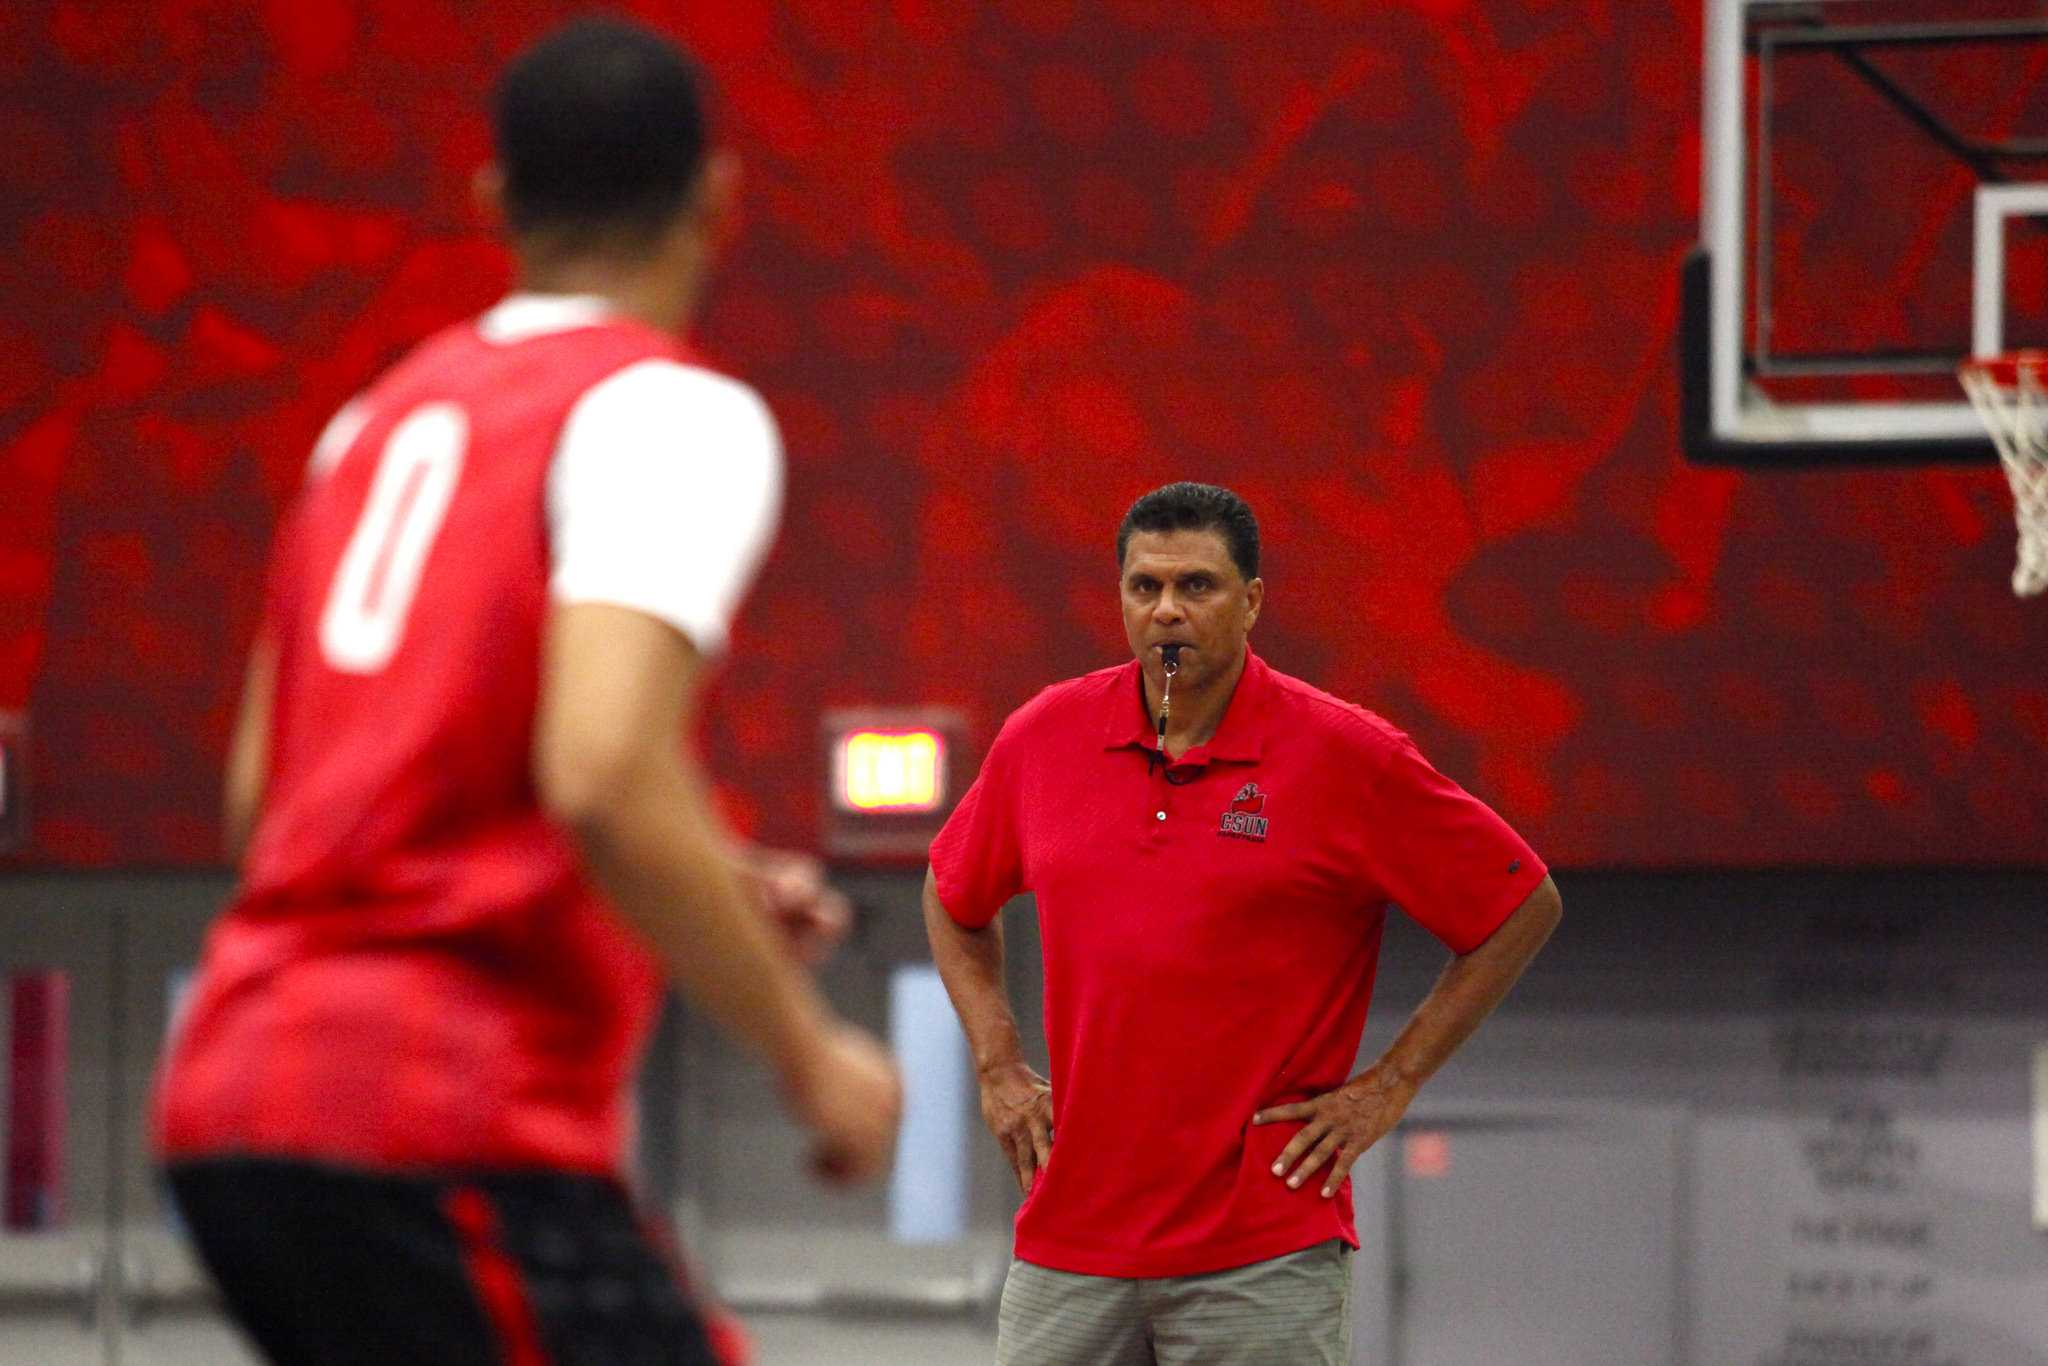 CSUN mens basketball head coach Reggie Theus will lead a young team is poised for a bounce back season after last years team finished 10-24. Photo credit: Juan Pardo